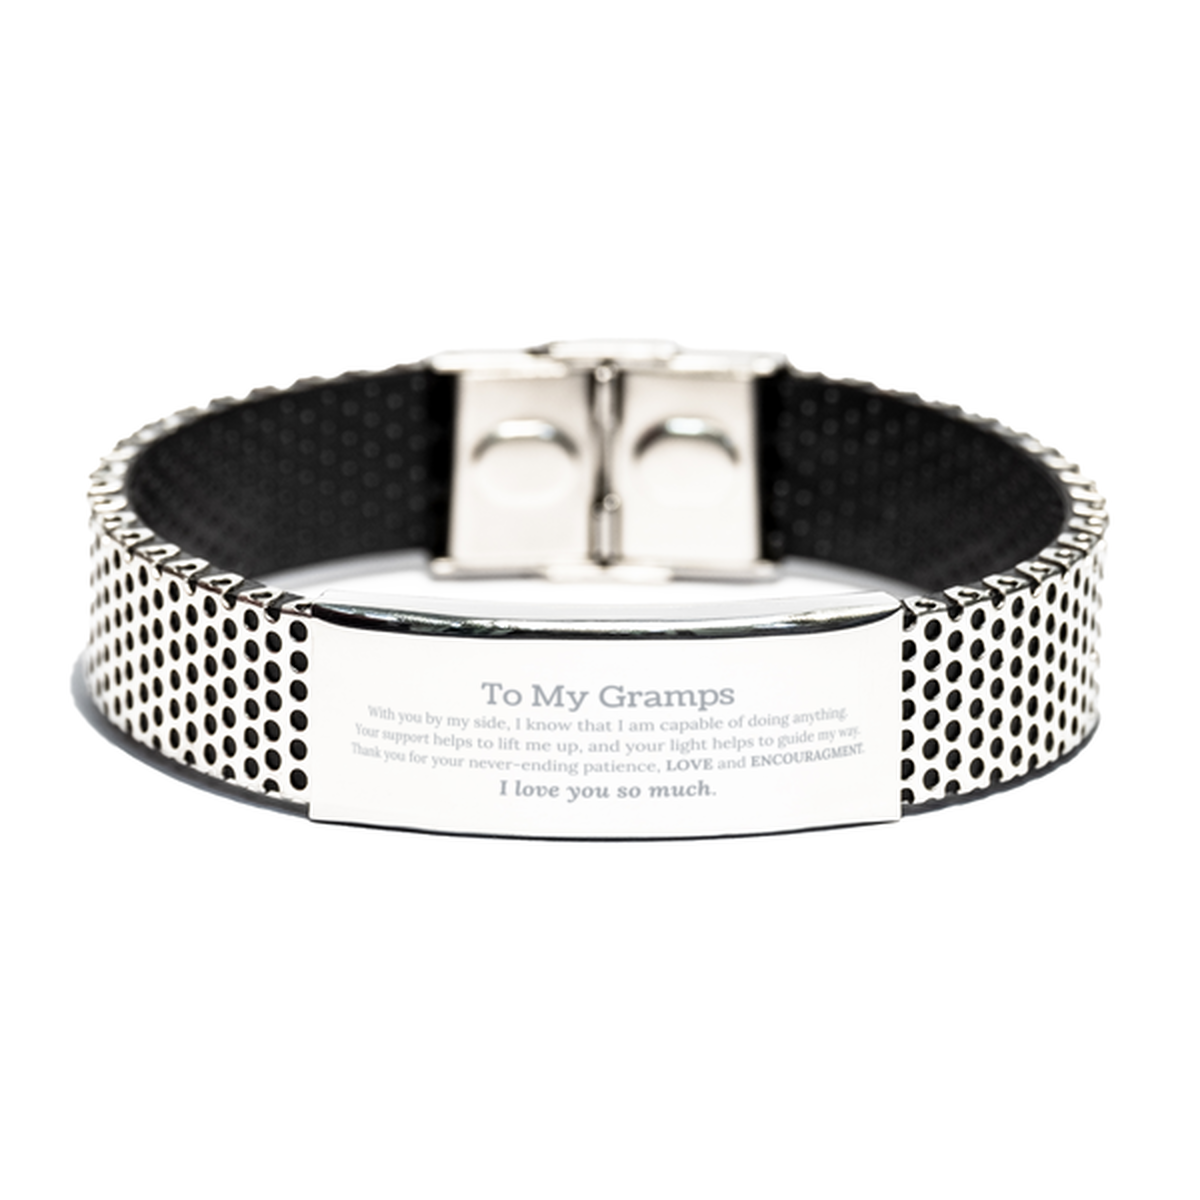 Appreciation Gramps Stainless Steel Bracelet Gifts, To My Gramps Birthday Christmas Wedding Keepsake Gifts for Gramps With you by my side, I know that I am capable of doing anything. I love you so much